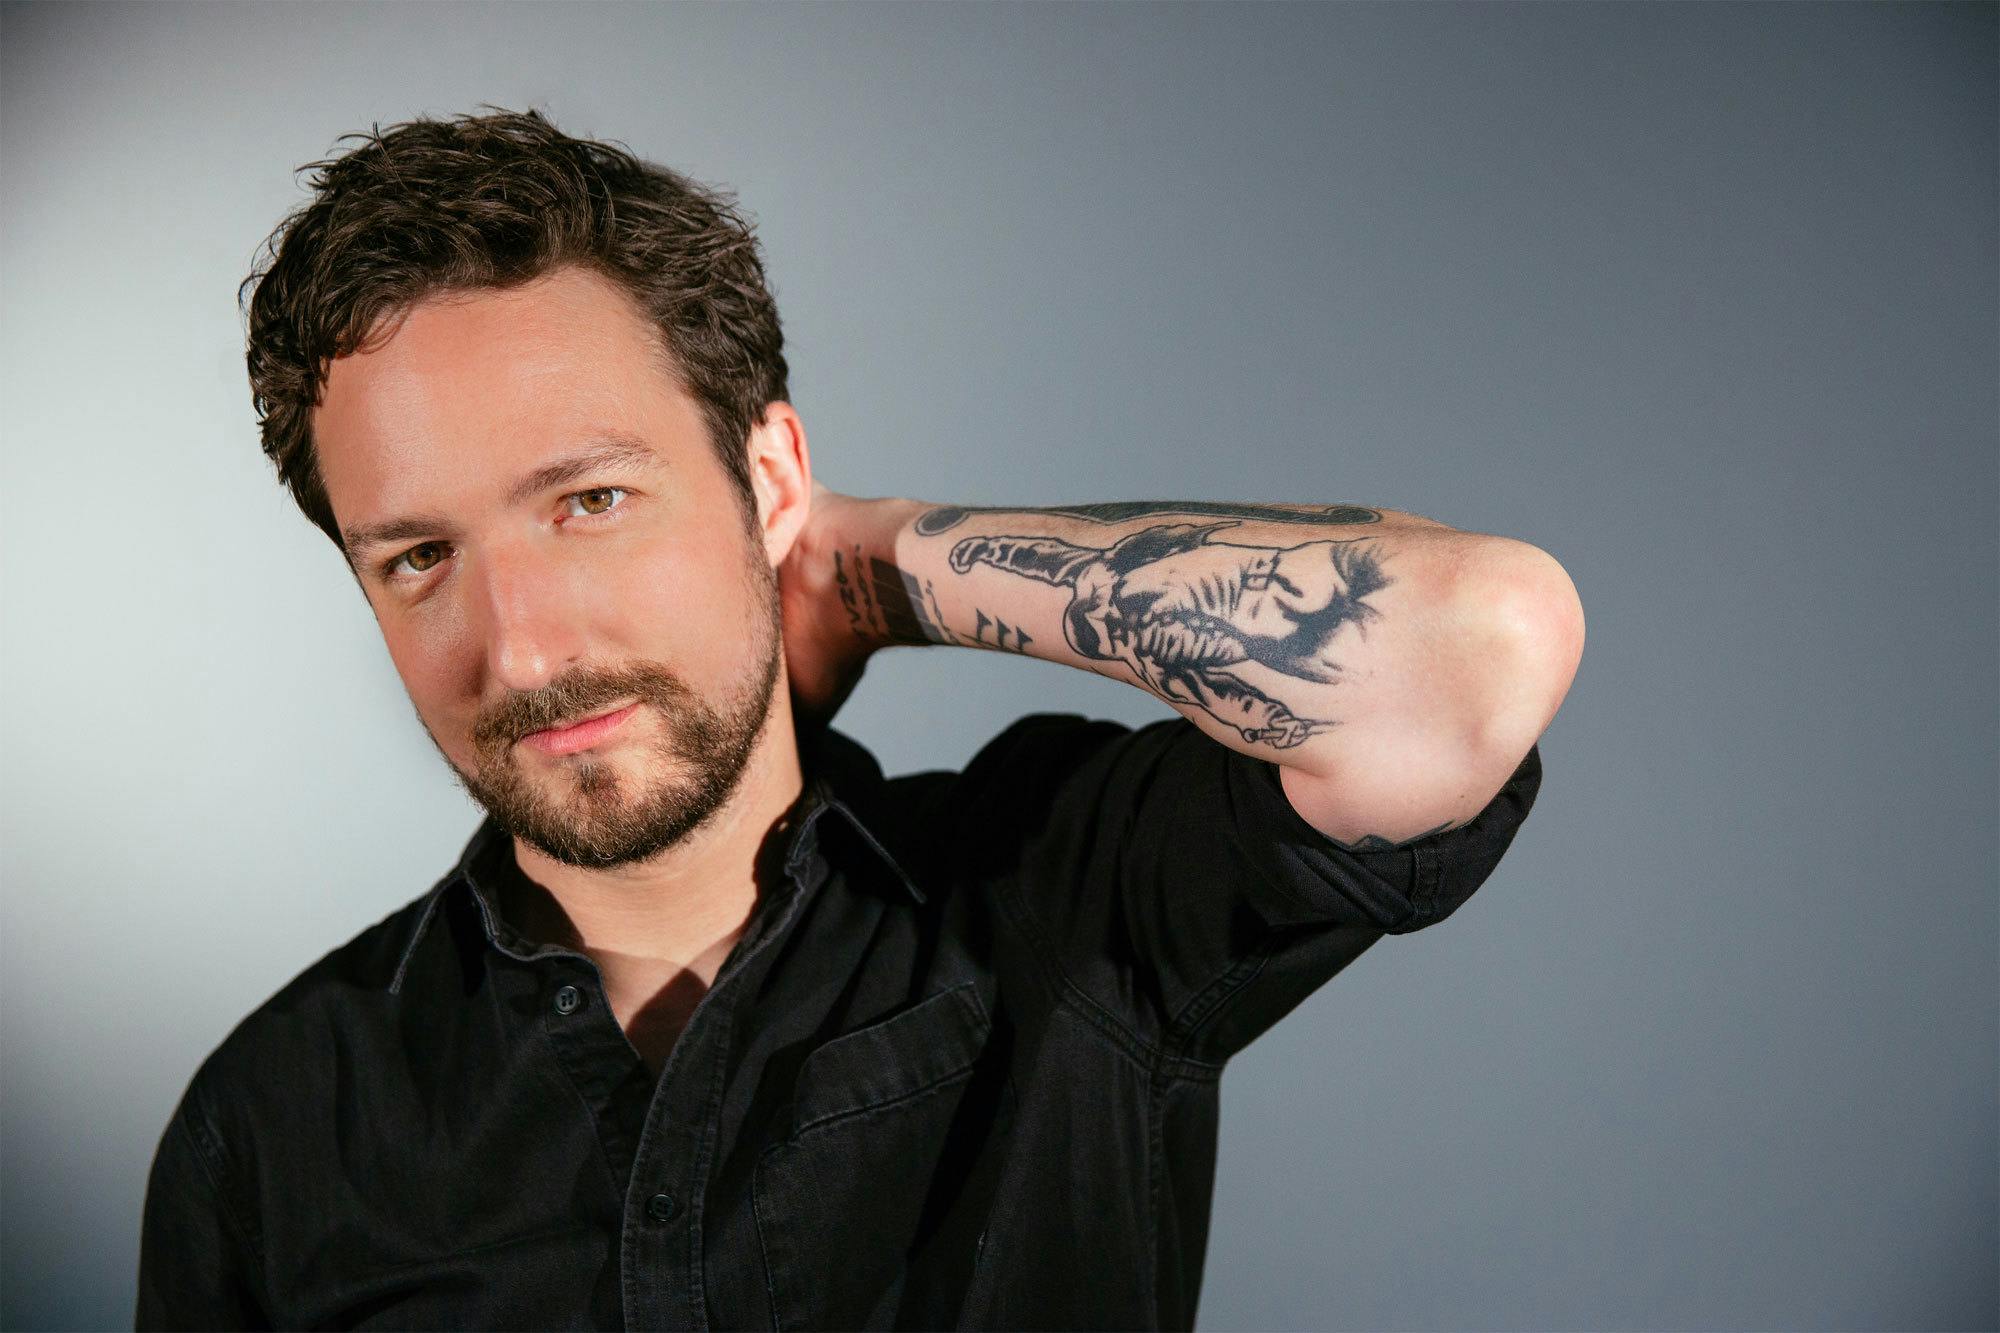 Frank Turner: The 10 Songs That Changed My Life